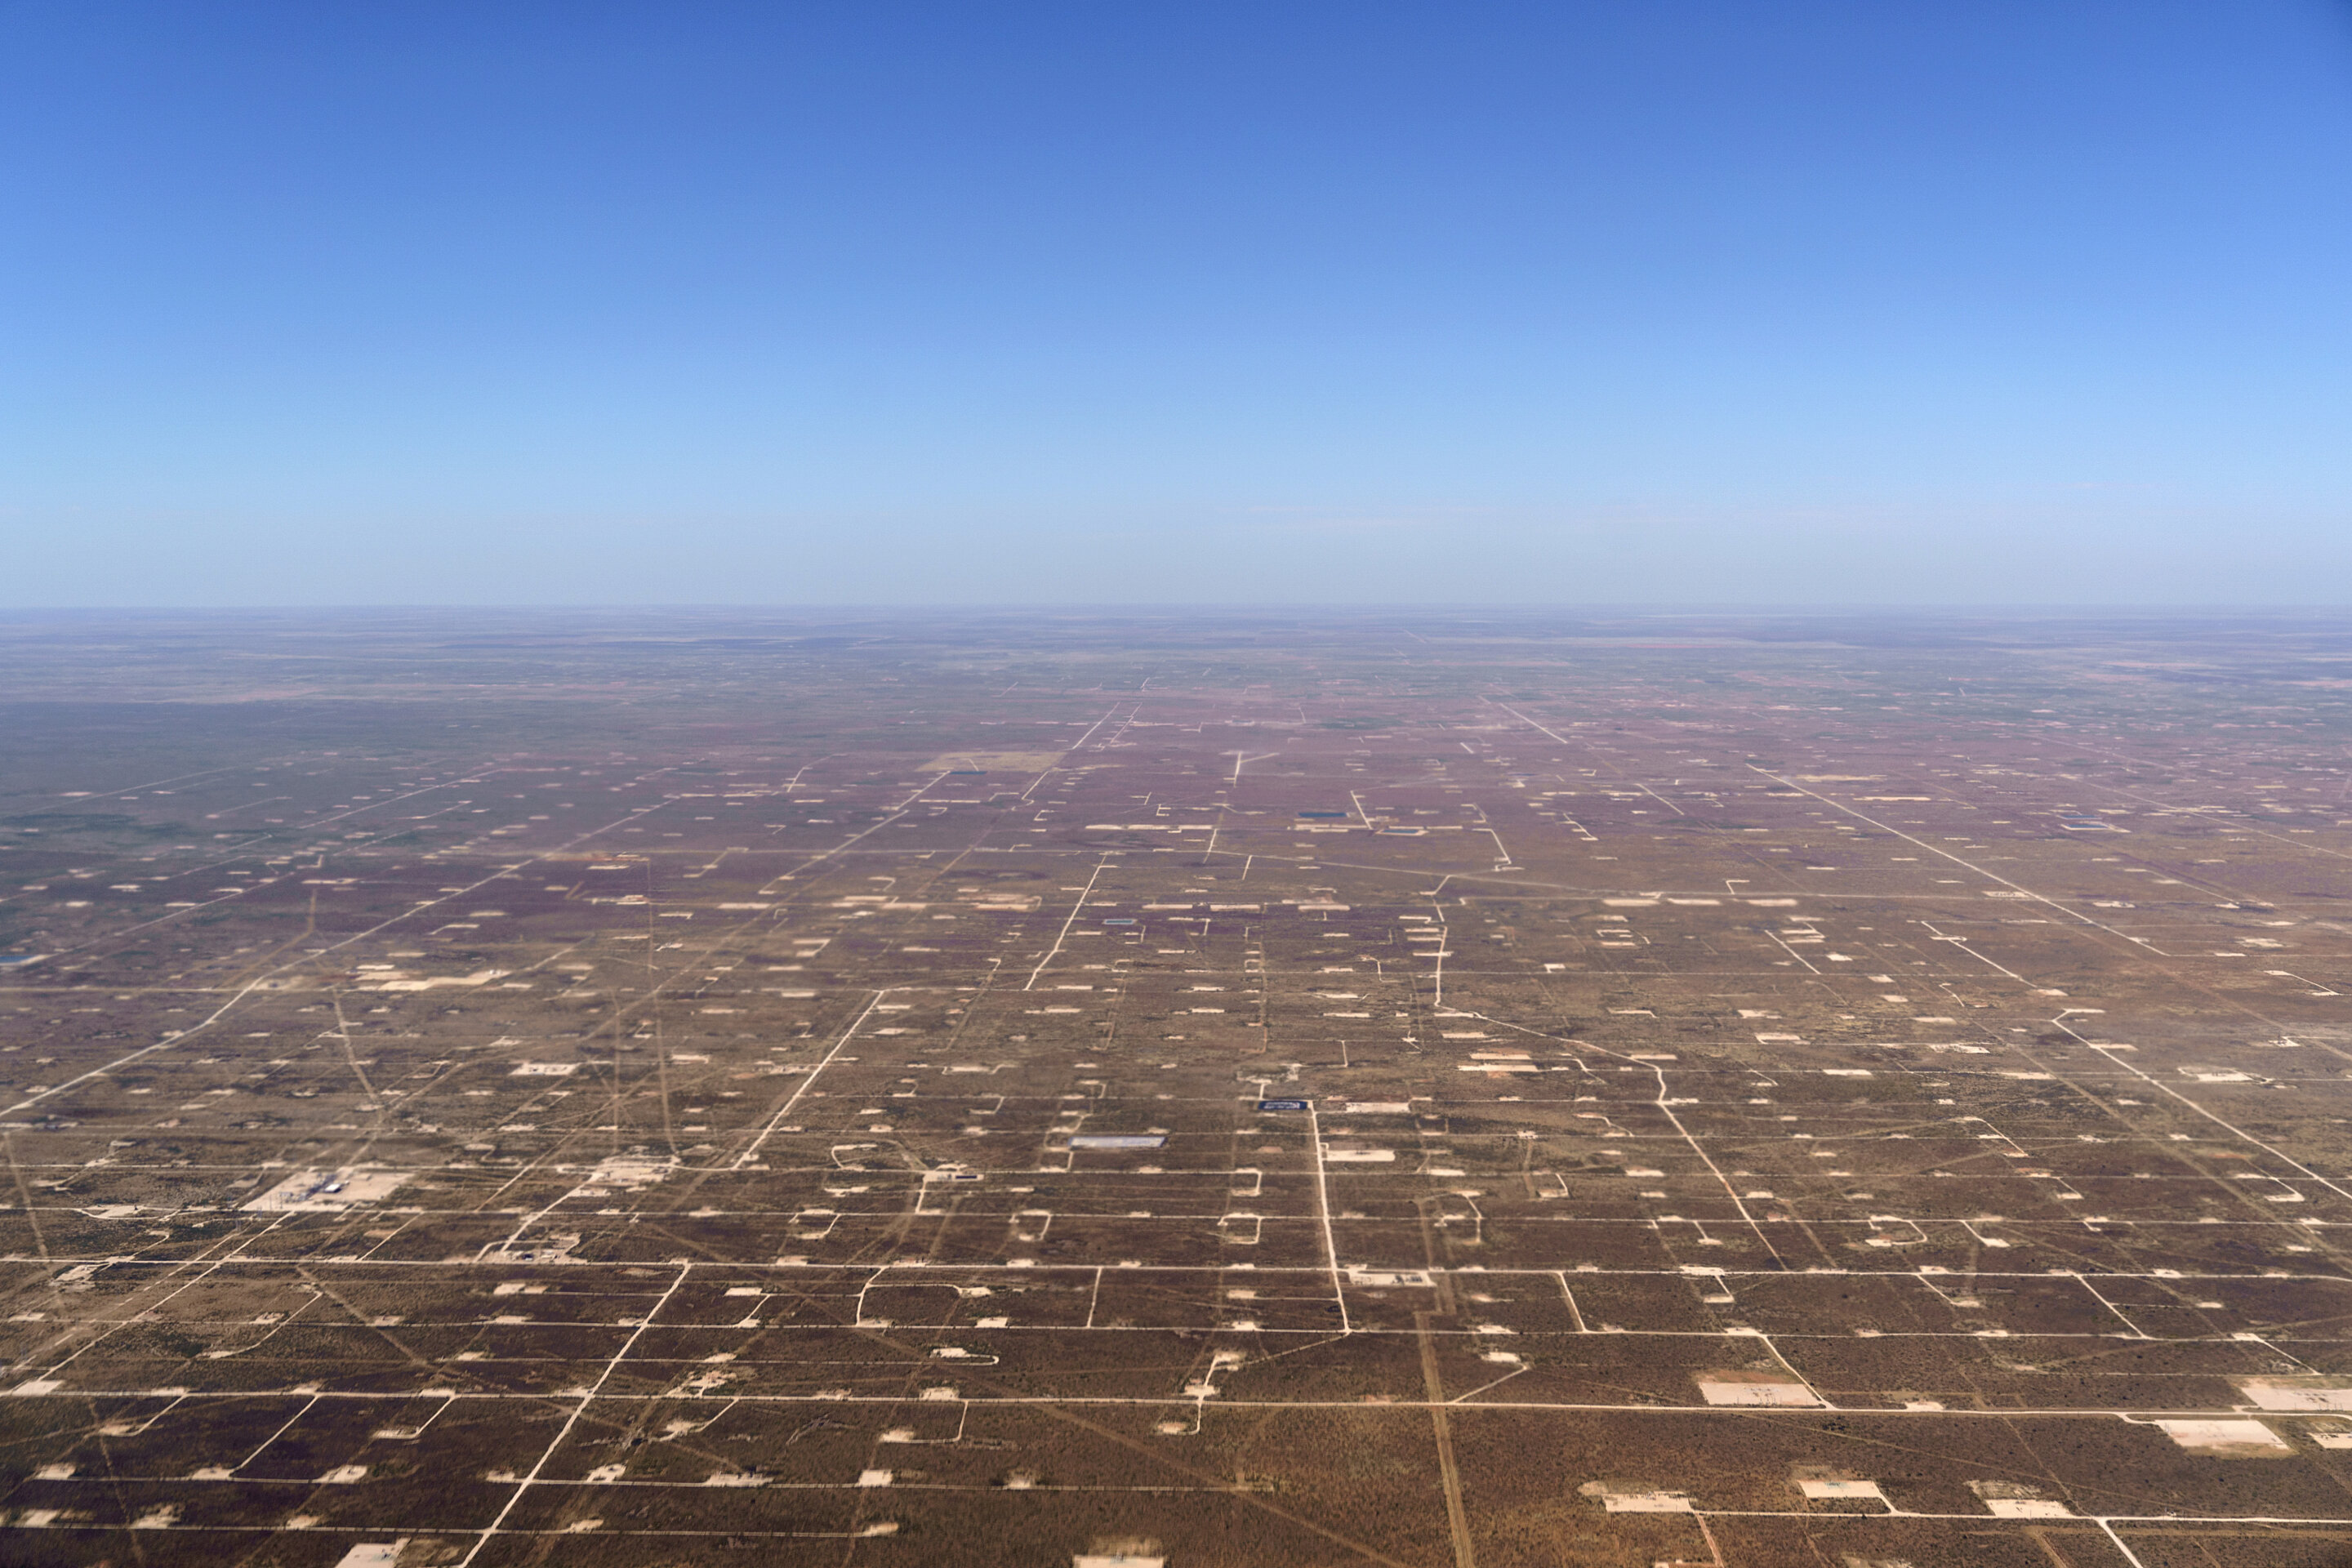 #EPA announces flights to look for methane in Permian Basin